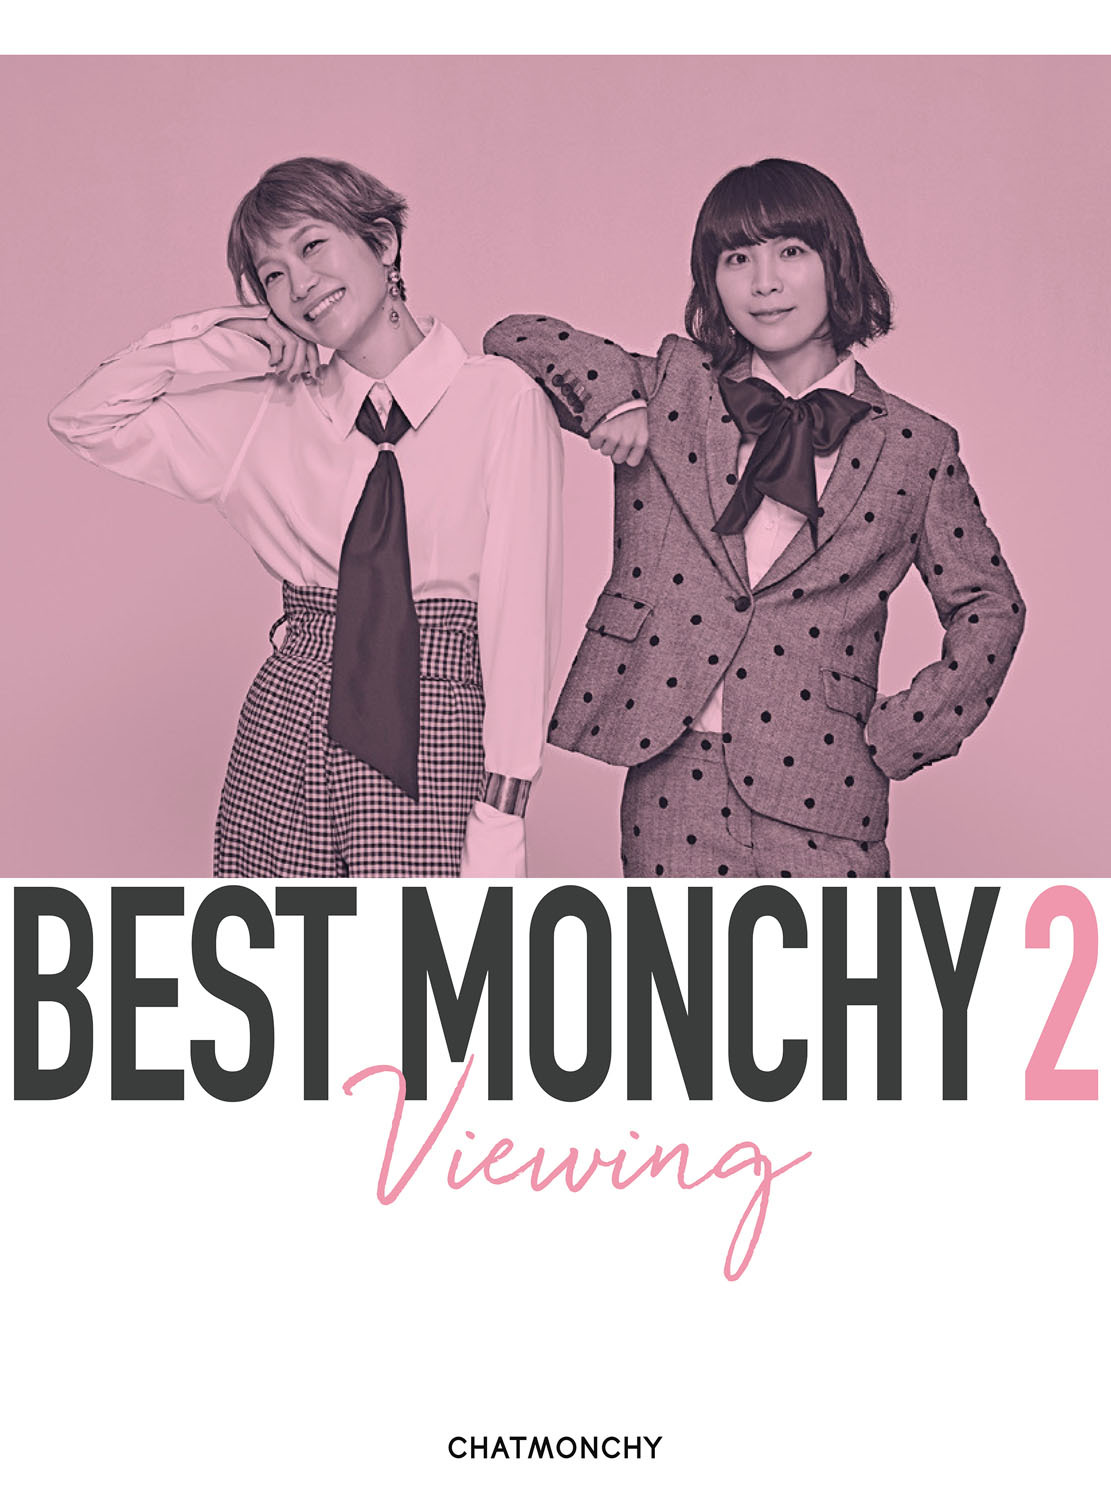 『BEST MONCHY 2 -Viewing-』